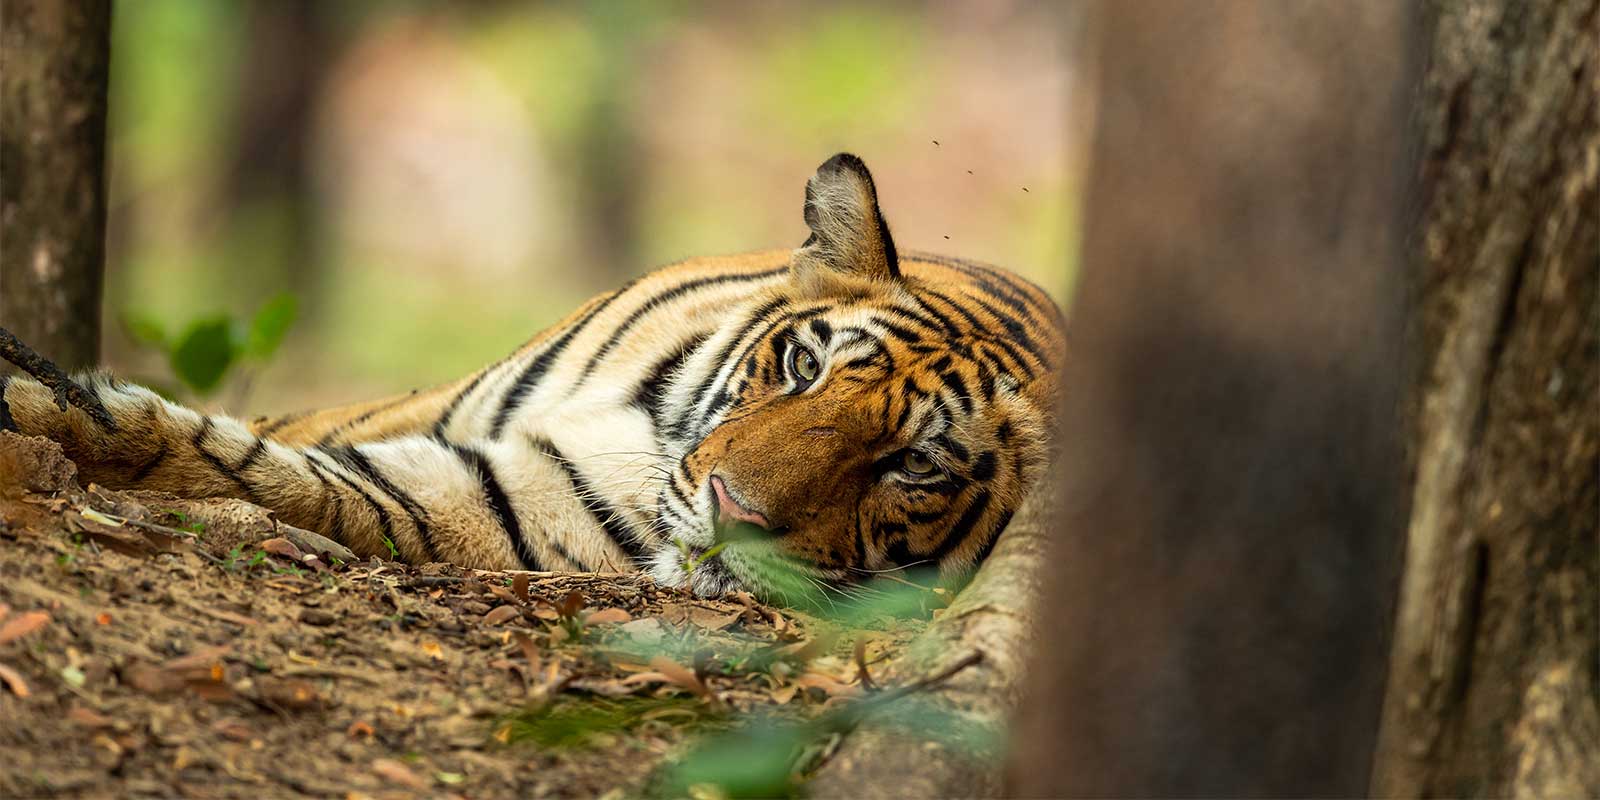 Tiger in Pench National Park, India